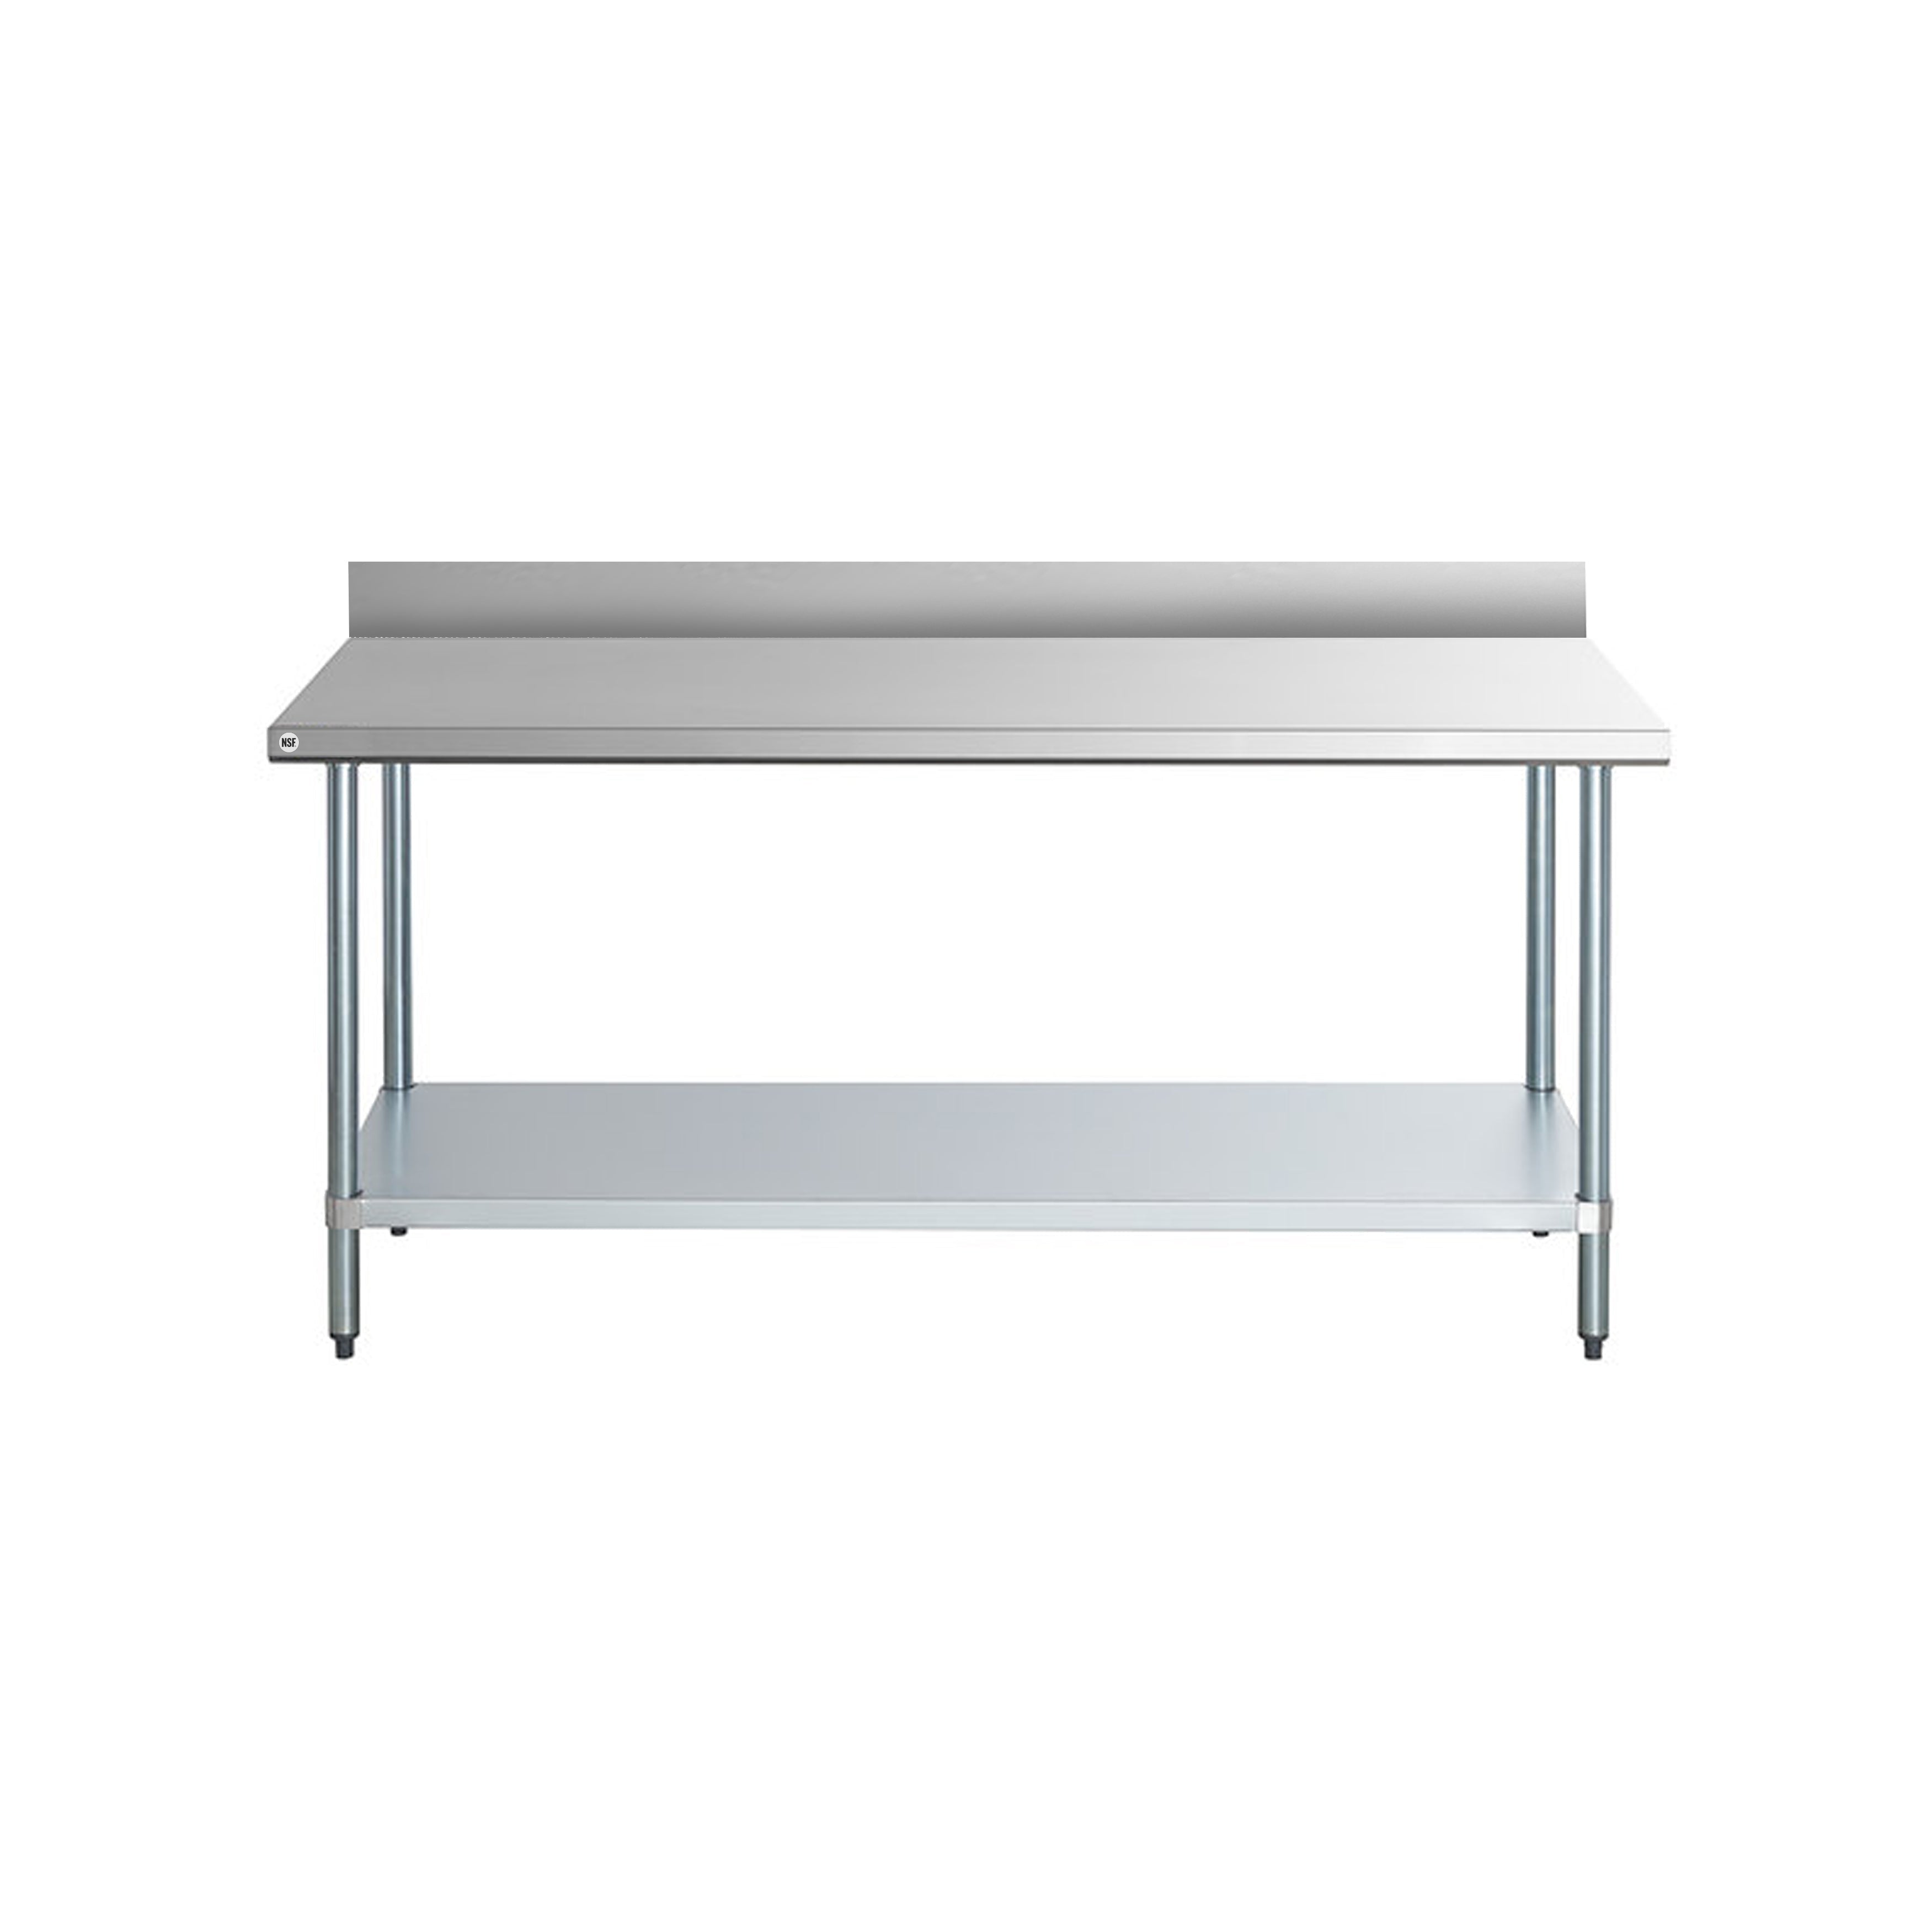 Omcan - 23807, Commercial 96" x 30" Stainless Steel Kitchen Work Table with 4" Back Splash 1700lbs Medium Duty